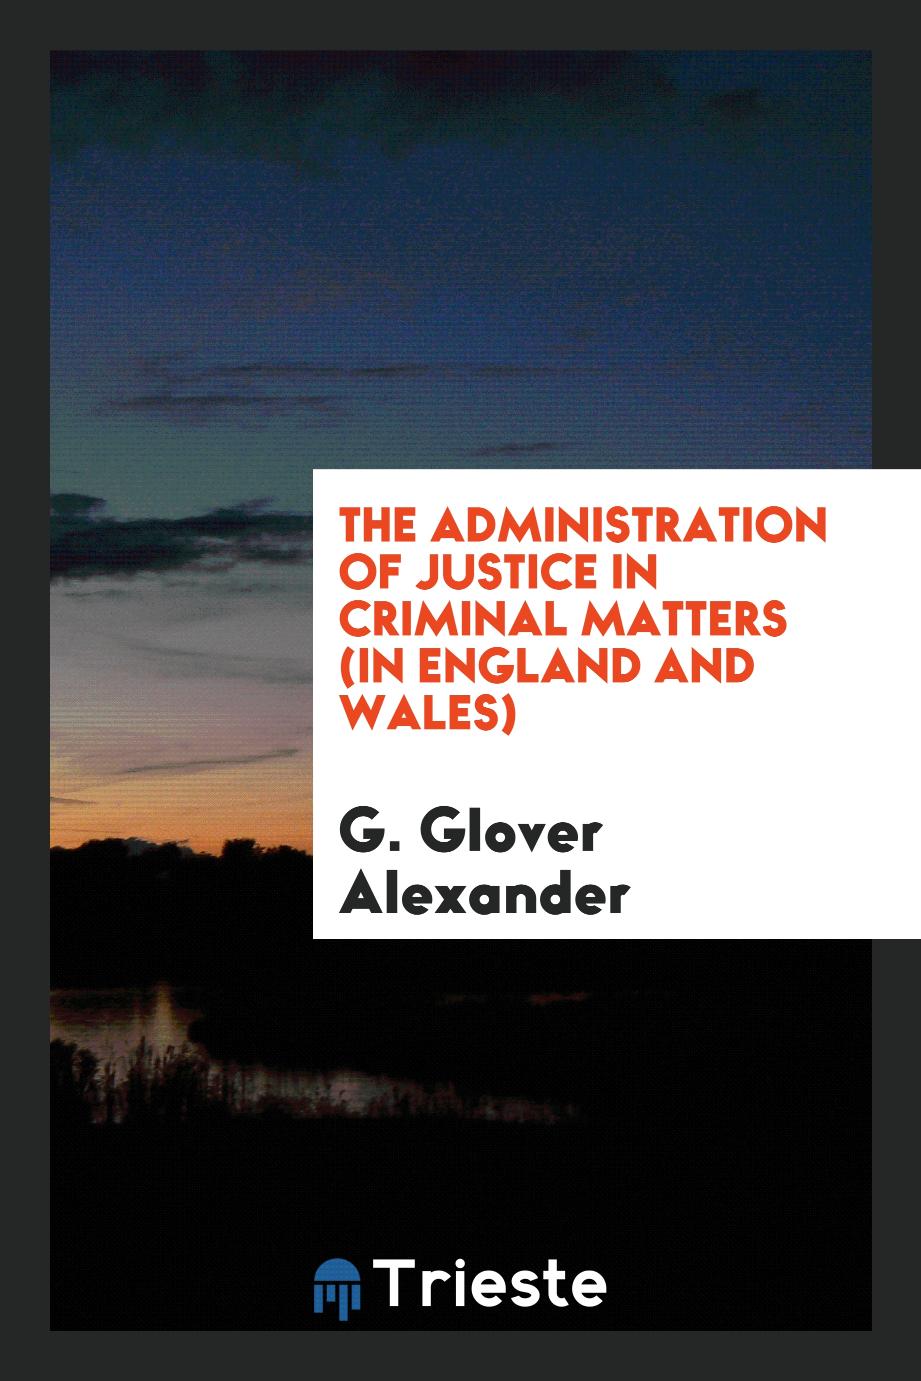 G. Glover Alexander - The administration of justice in criminal matters (in England and Wales)